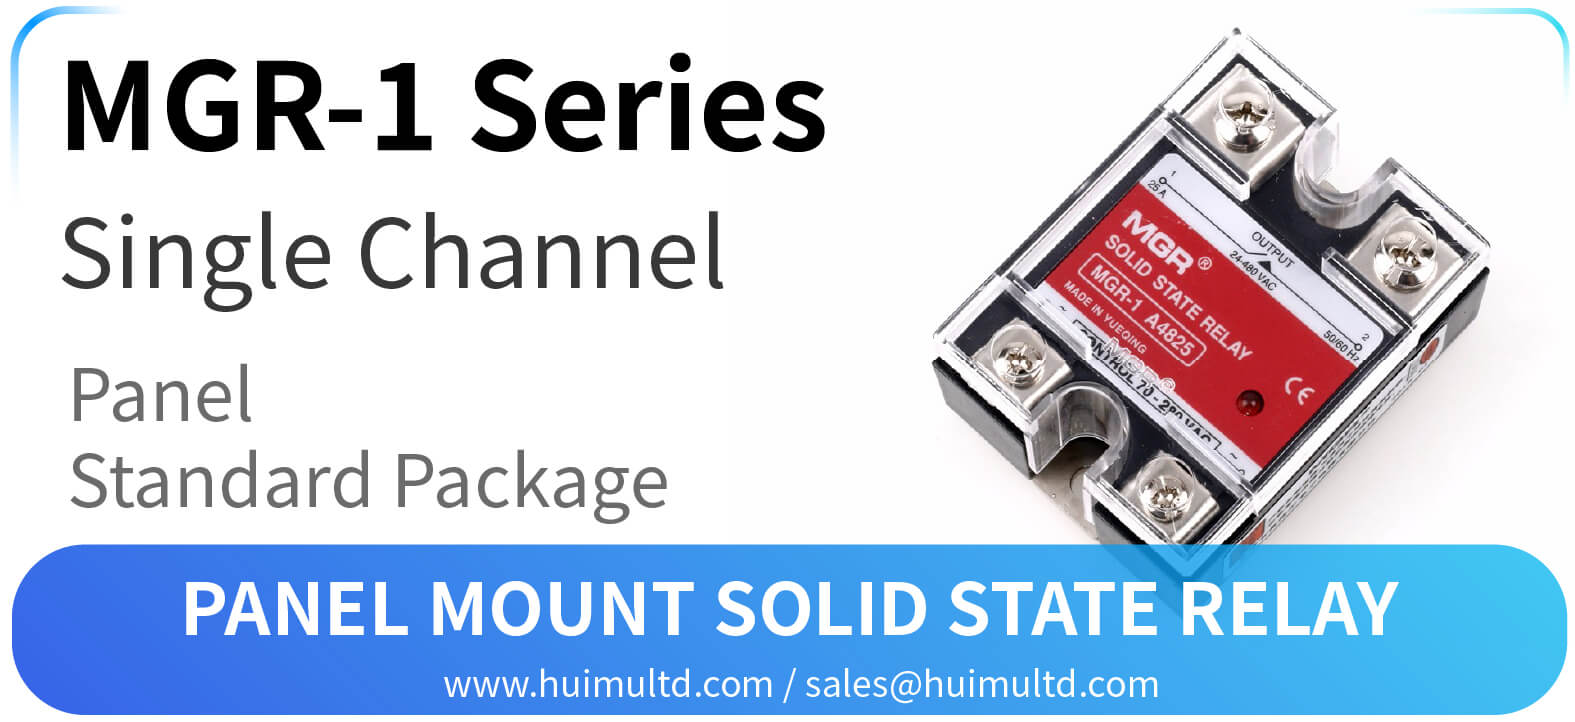 MGR-1 Series Panel Mount Solid State Relay